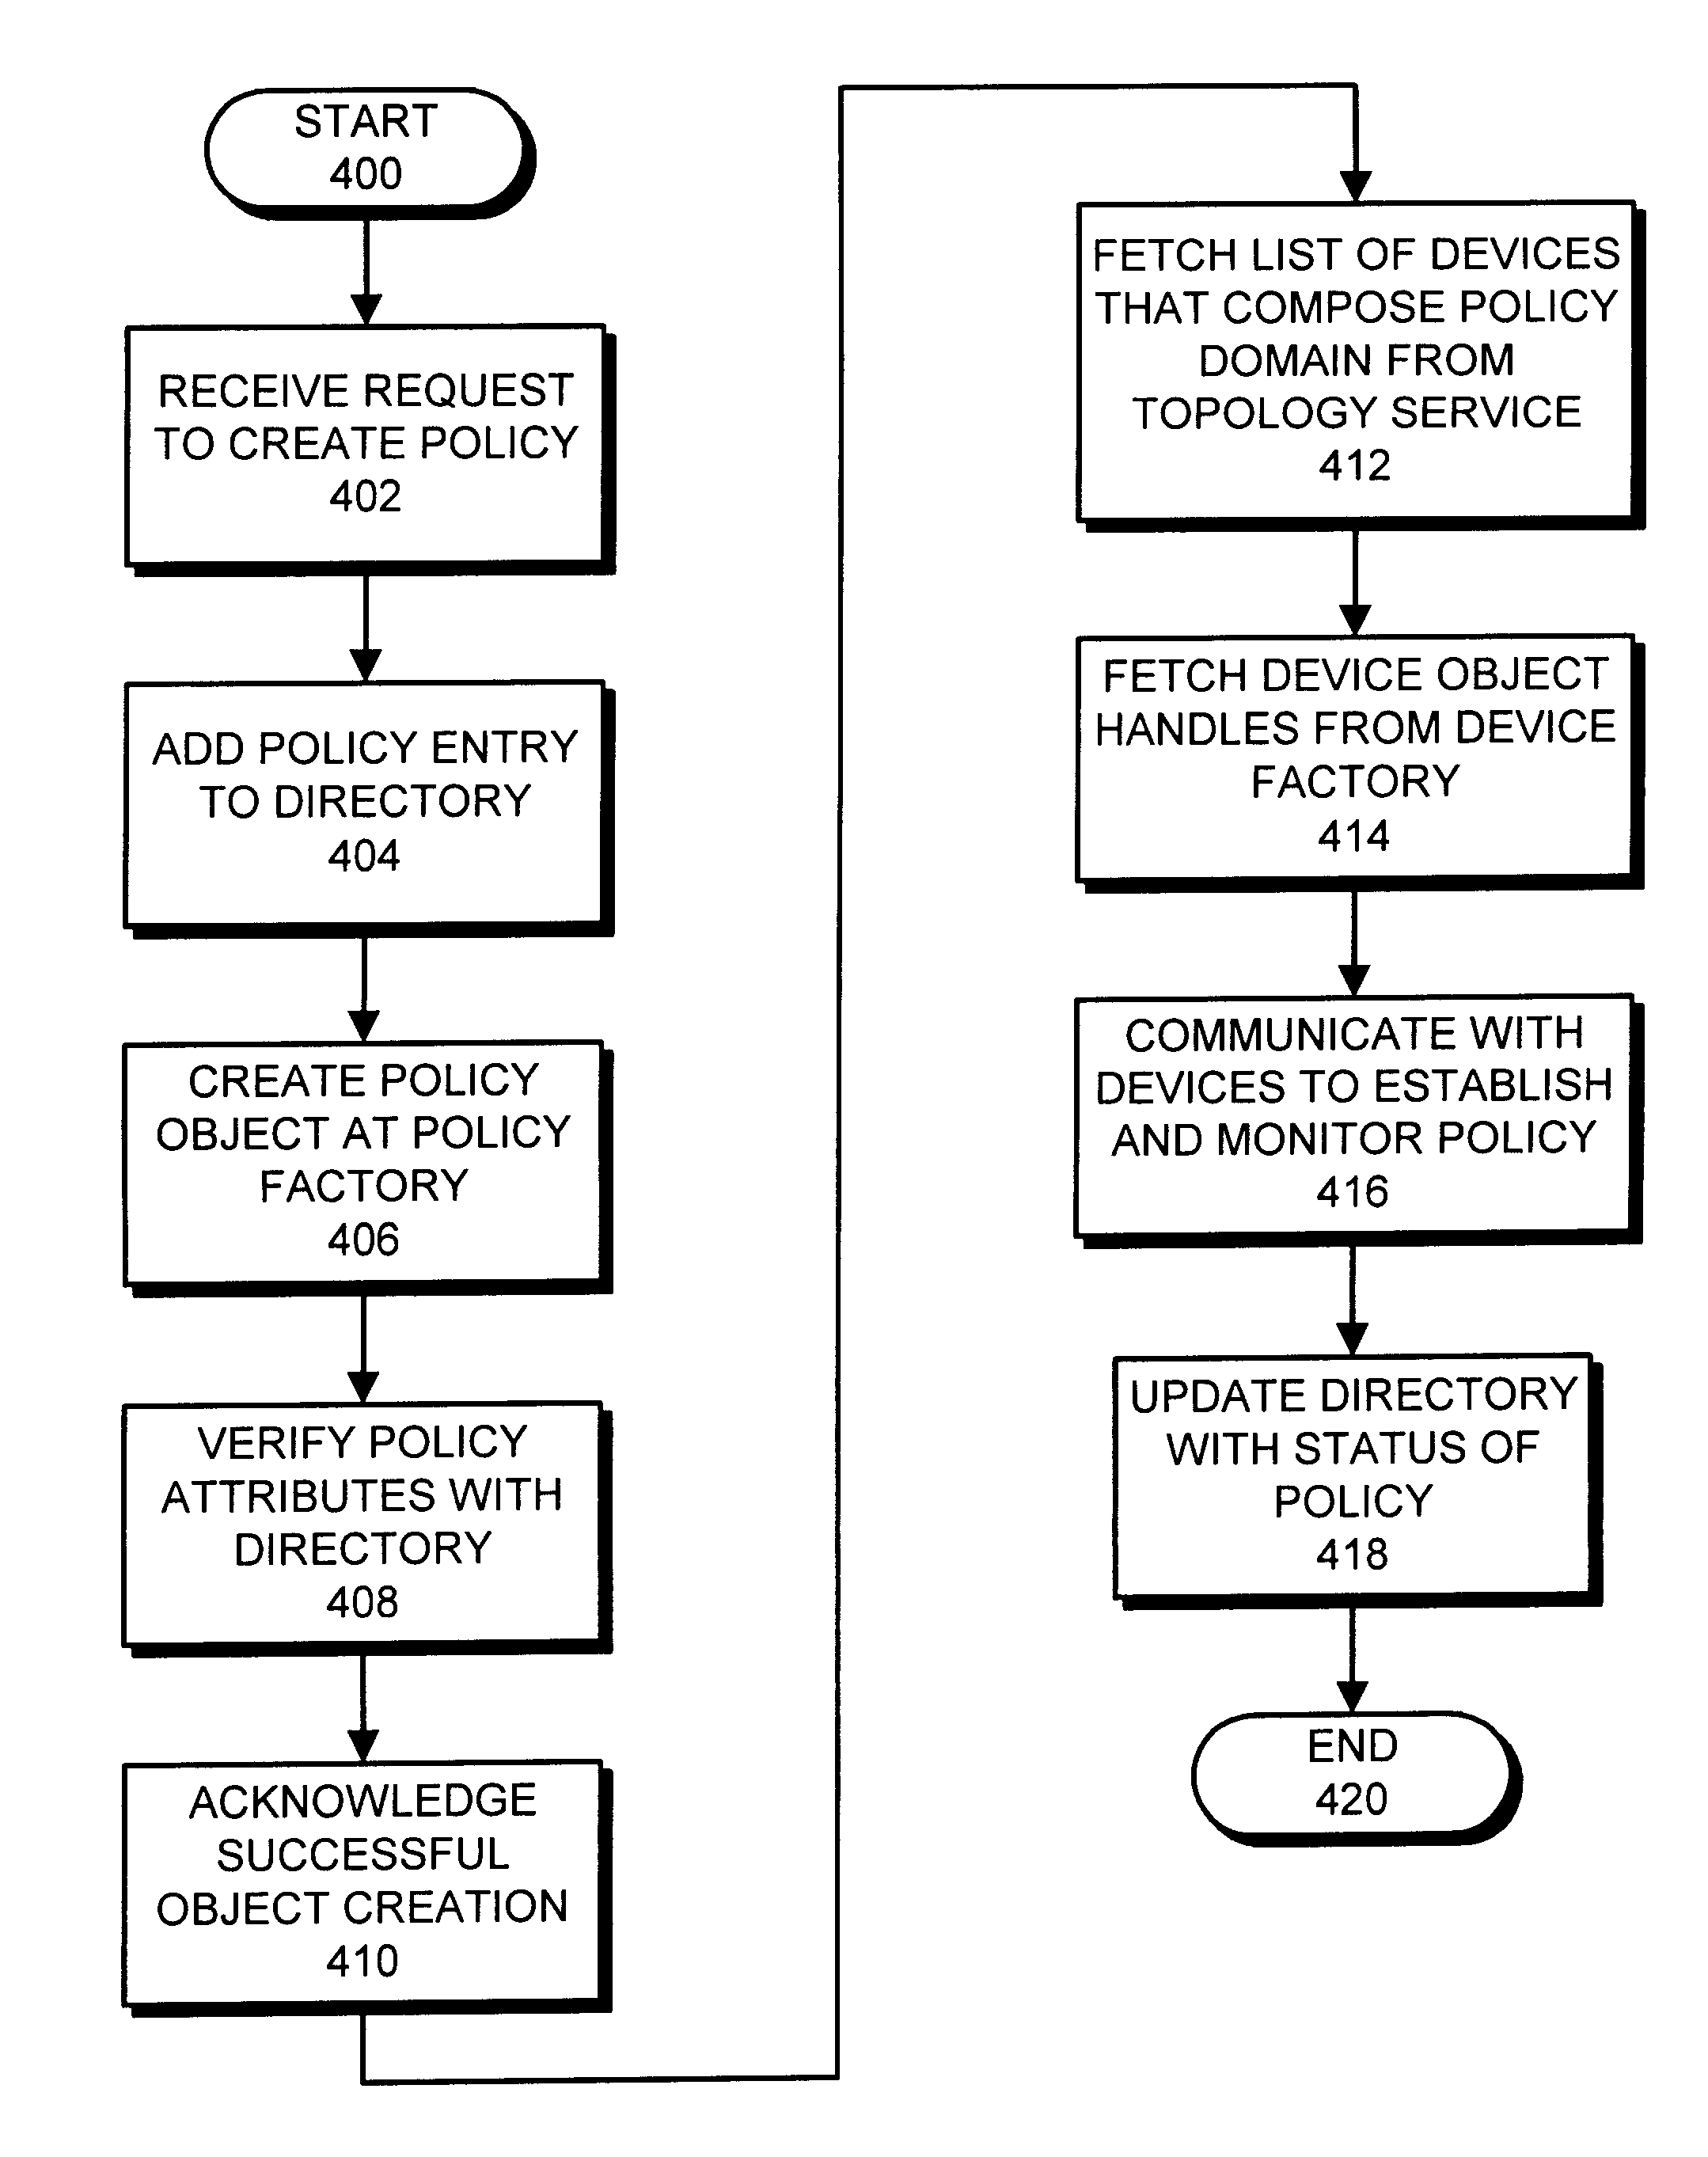 Controlling devices on a network through policies